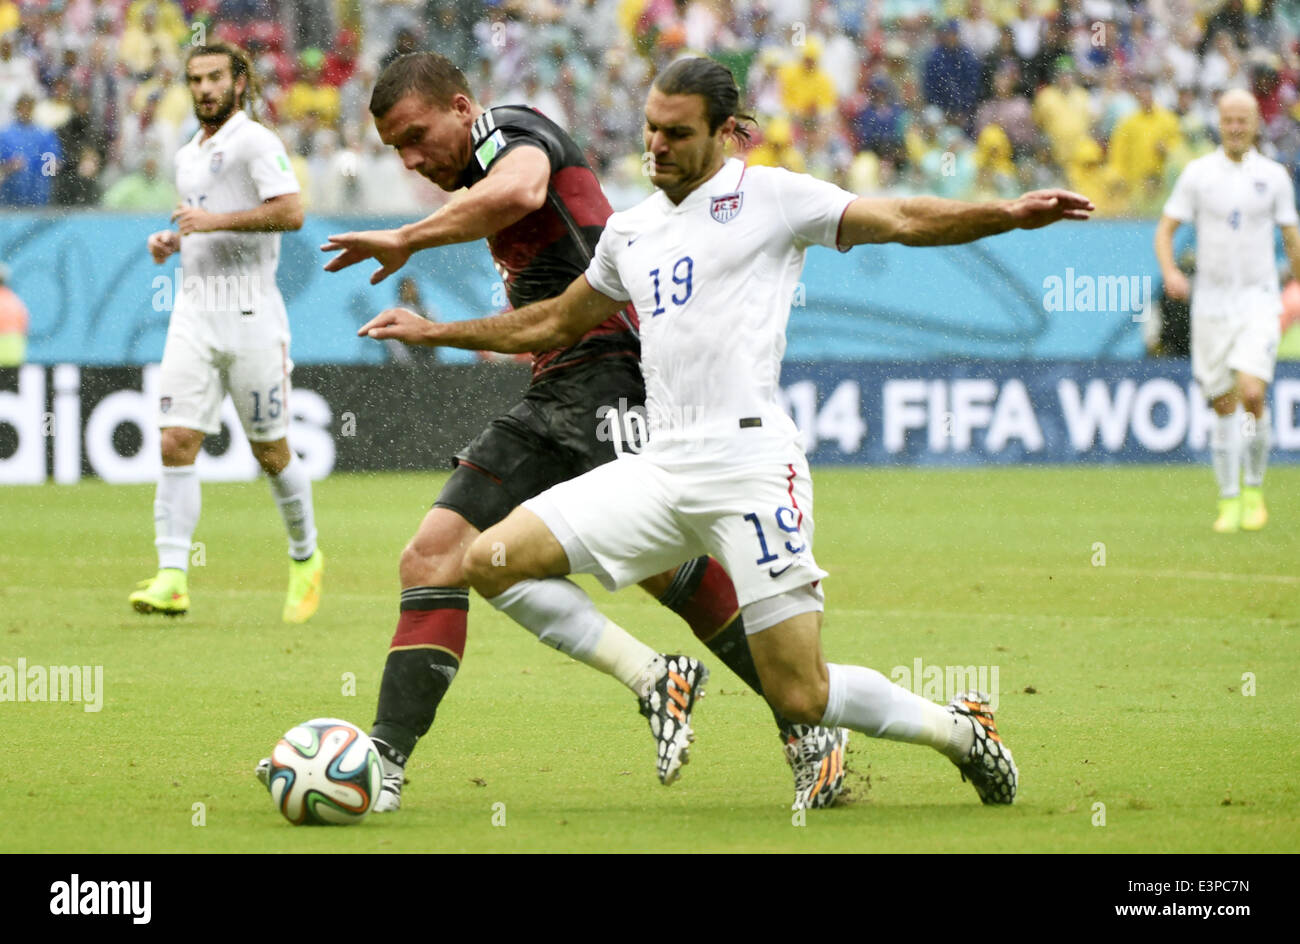 Recife, Brazil. 26th June, 2014. Germany's Lukas Podolski (L, front) vies with Graham Zusi of the U.S. (R, front) during a Group G match between the U.S. and Germany of 2014 FIFA World Cup at the Arena Pernambuco Stadium in Recife, Brazil, on June 26, 2014. Credit:  Lui Siu Wai/Xinhua/Alamy Live News Stock Photo